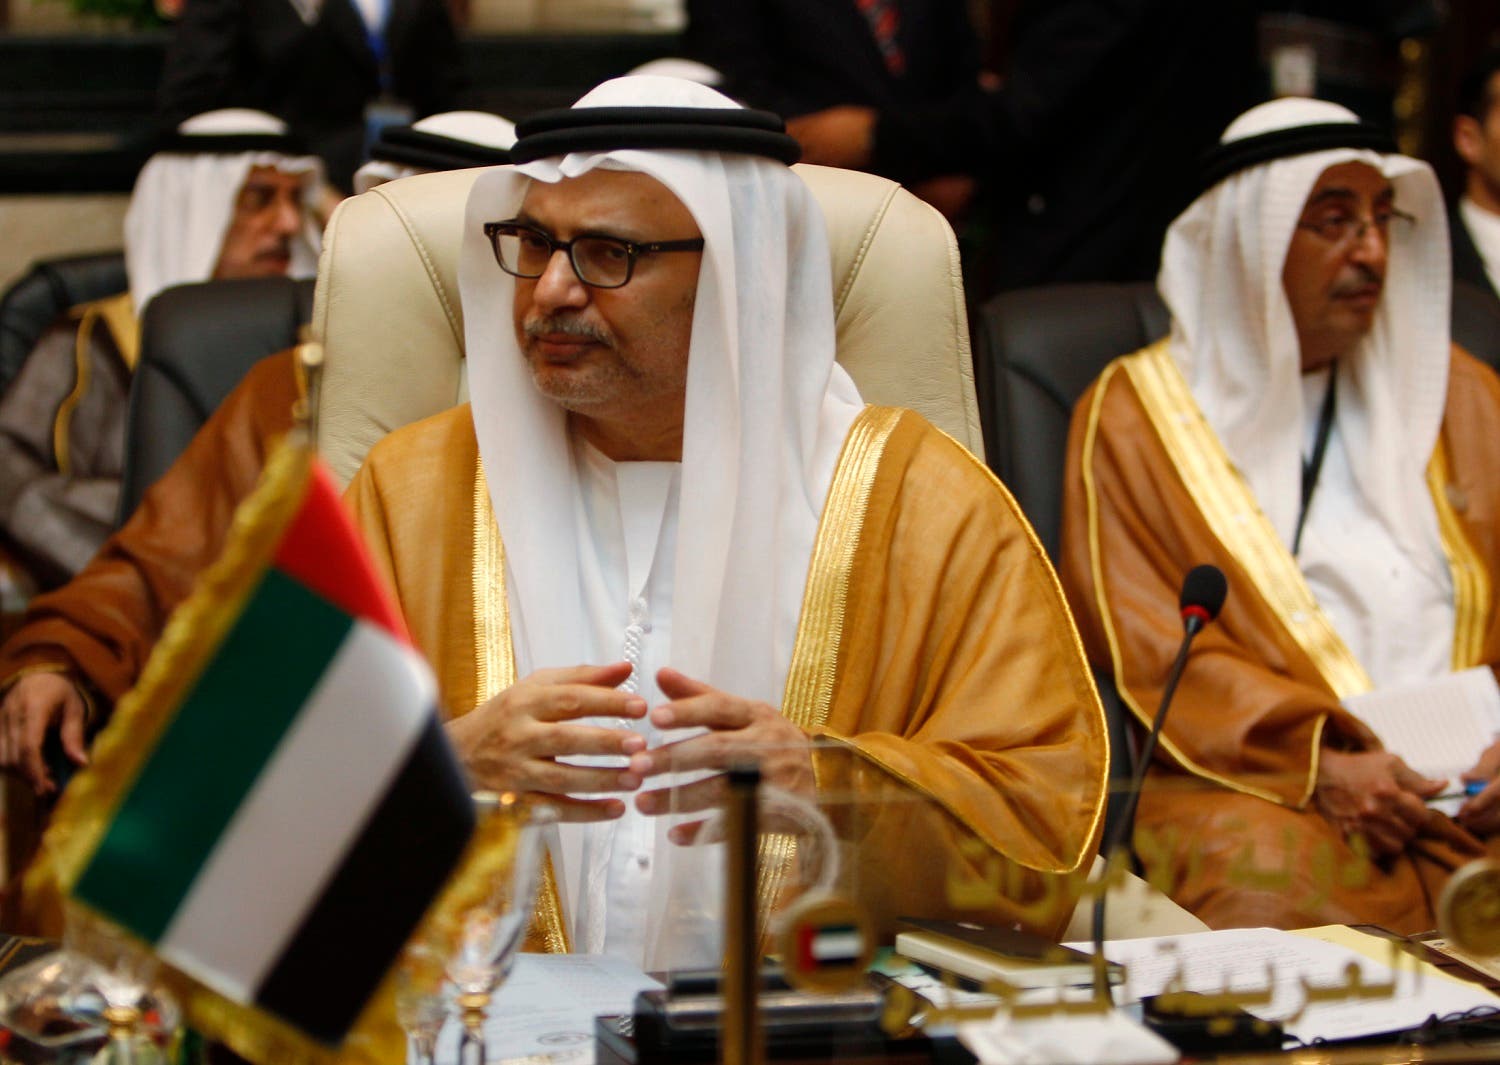 UAE's Minister of State for Foreign Affairs Anwar Mohammed Gargash attends the Arab League foreign ministers meeting in Baghdad March 28, 2012. (File Photo: Reuters)